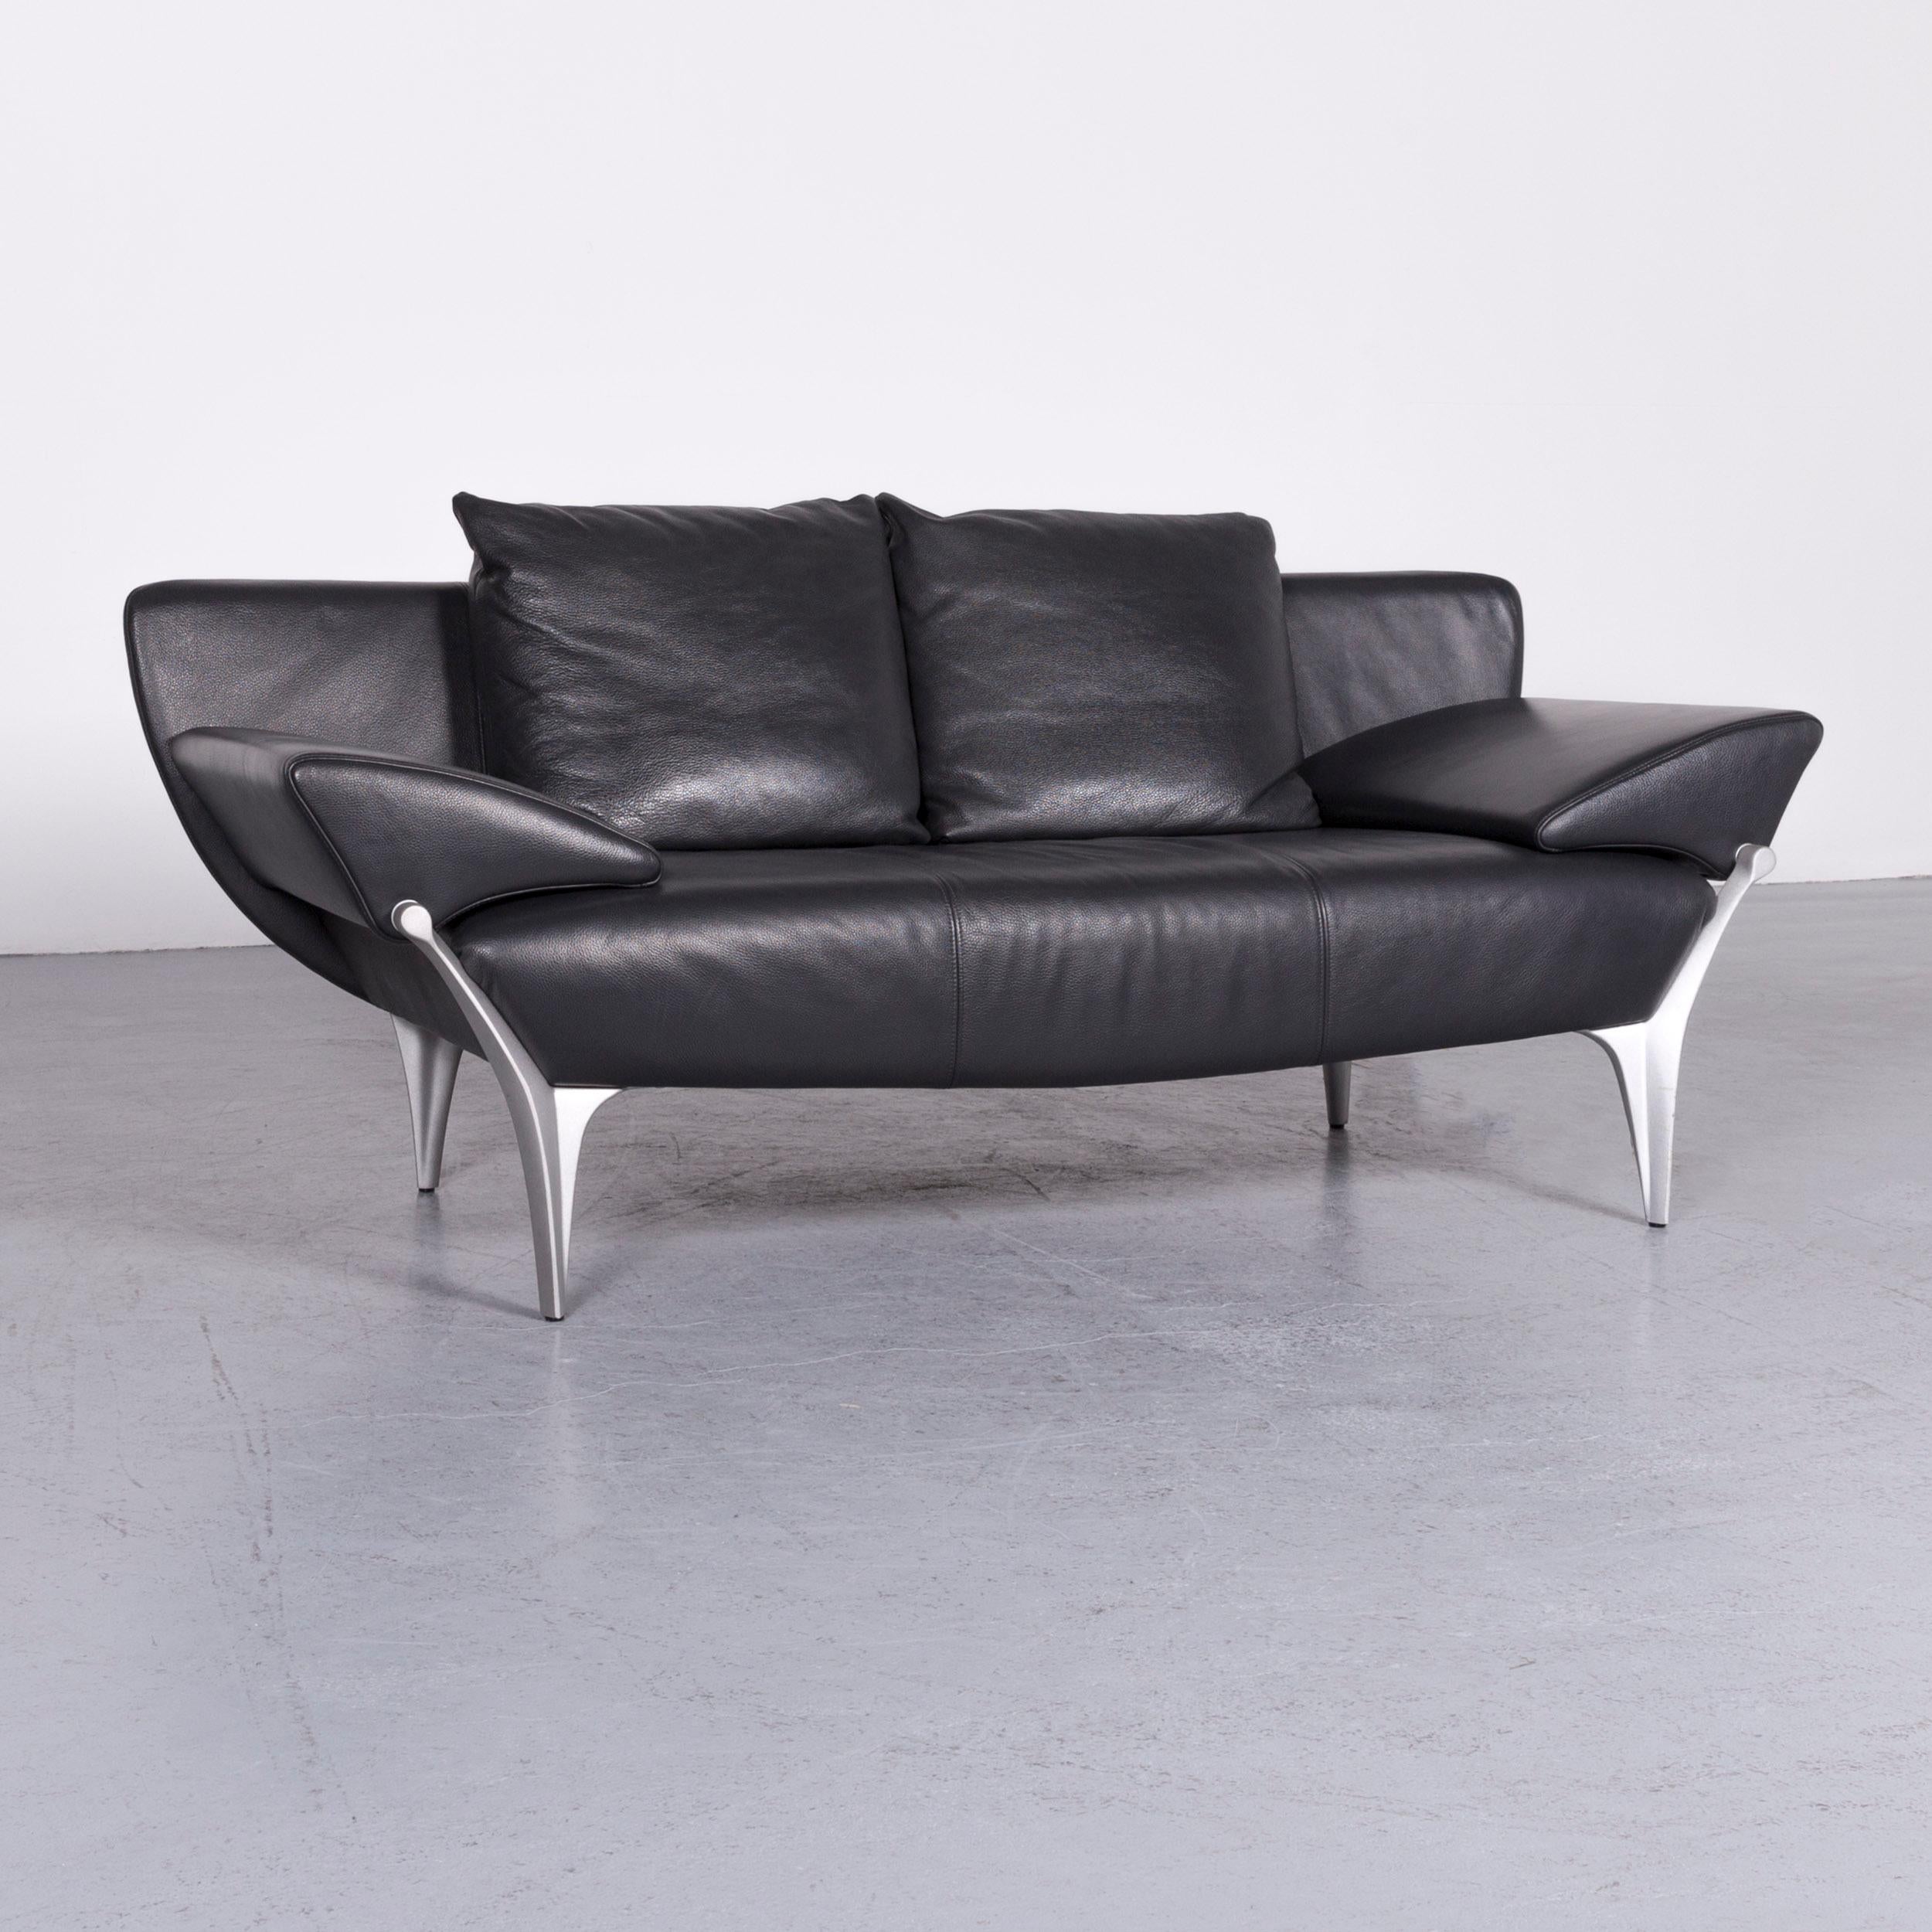 We bring to you a Rolf Benz 1600 designer leather sofa black two-seat couch.